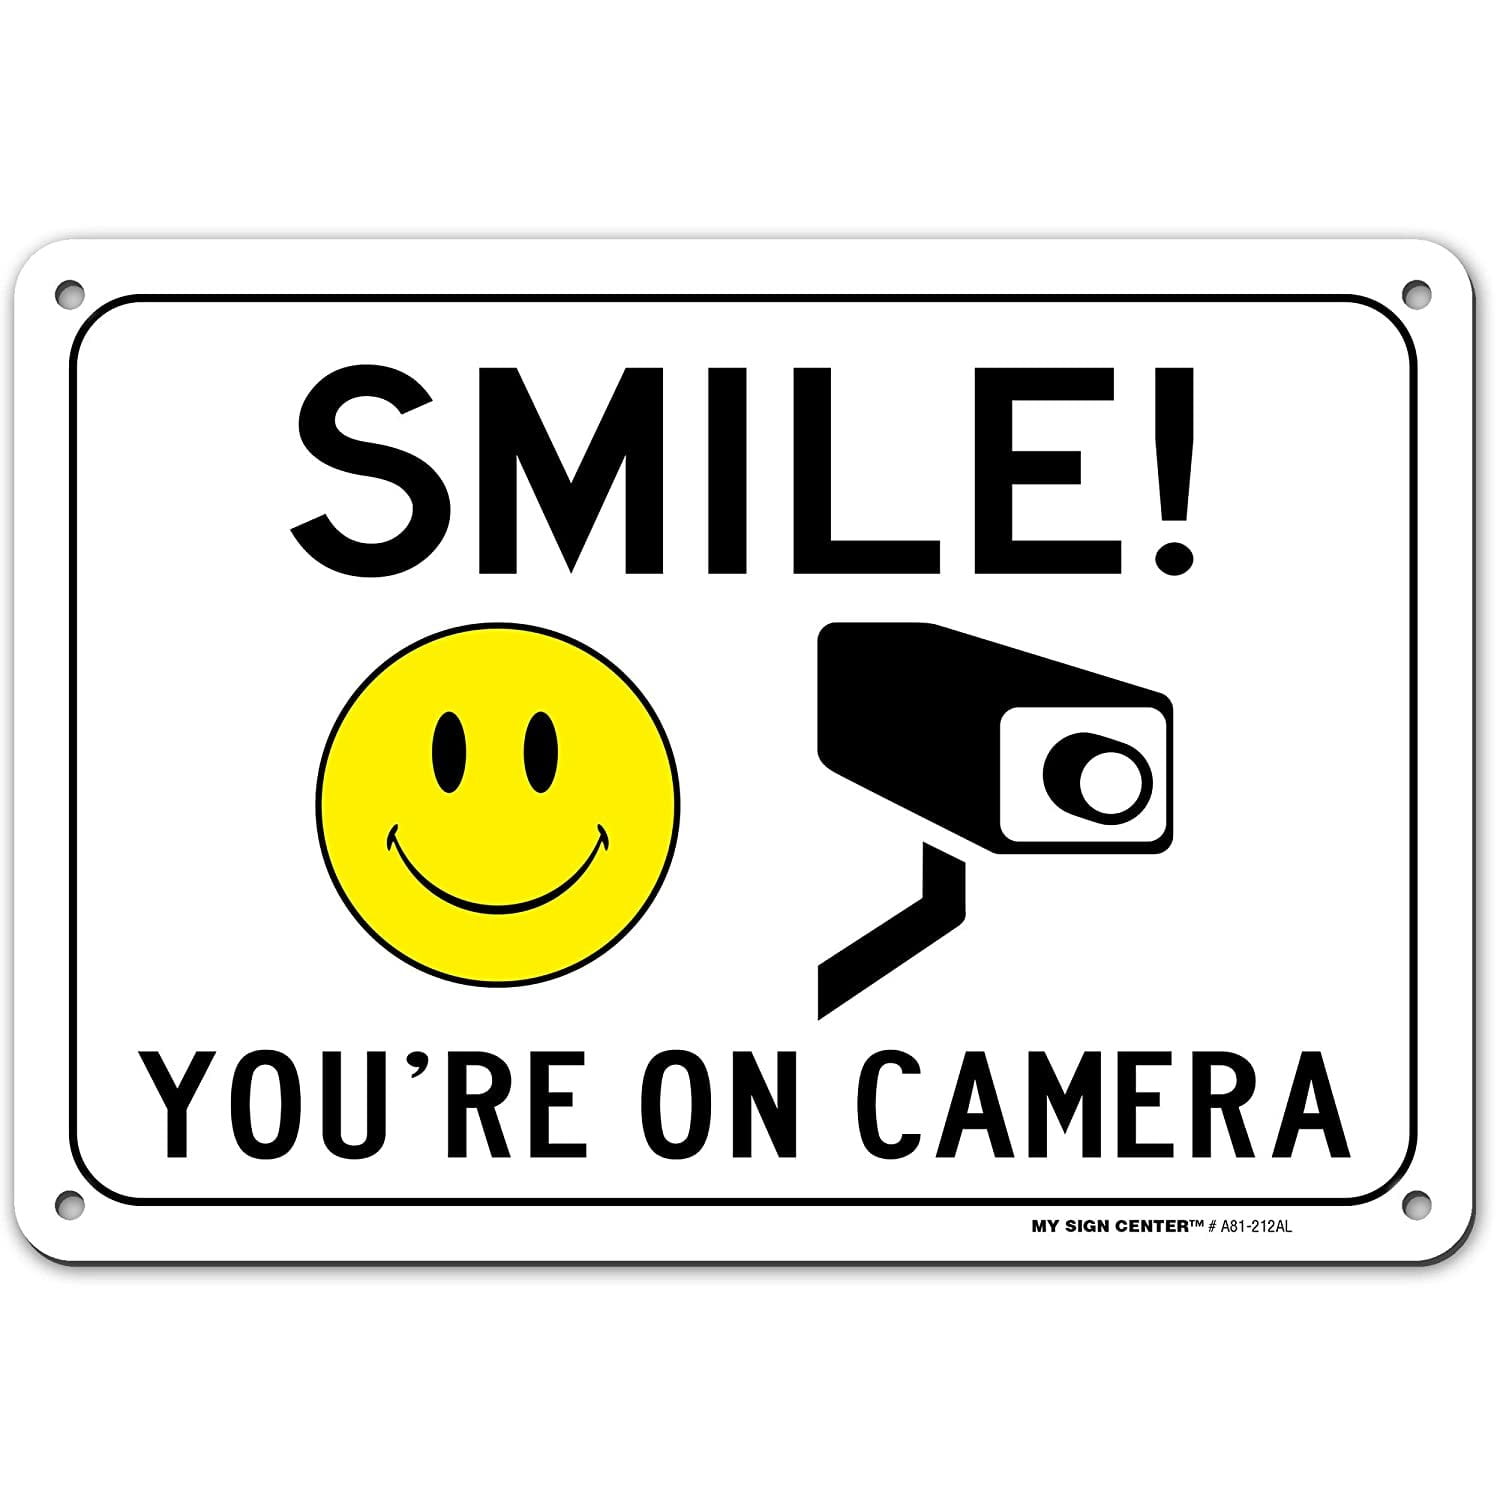 New " SMILE YOU'RE ON CAMERA" 9.5" x 14" Weatherproof  Bright Yellow Video Sign 